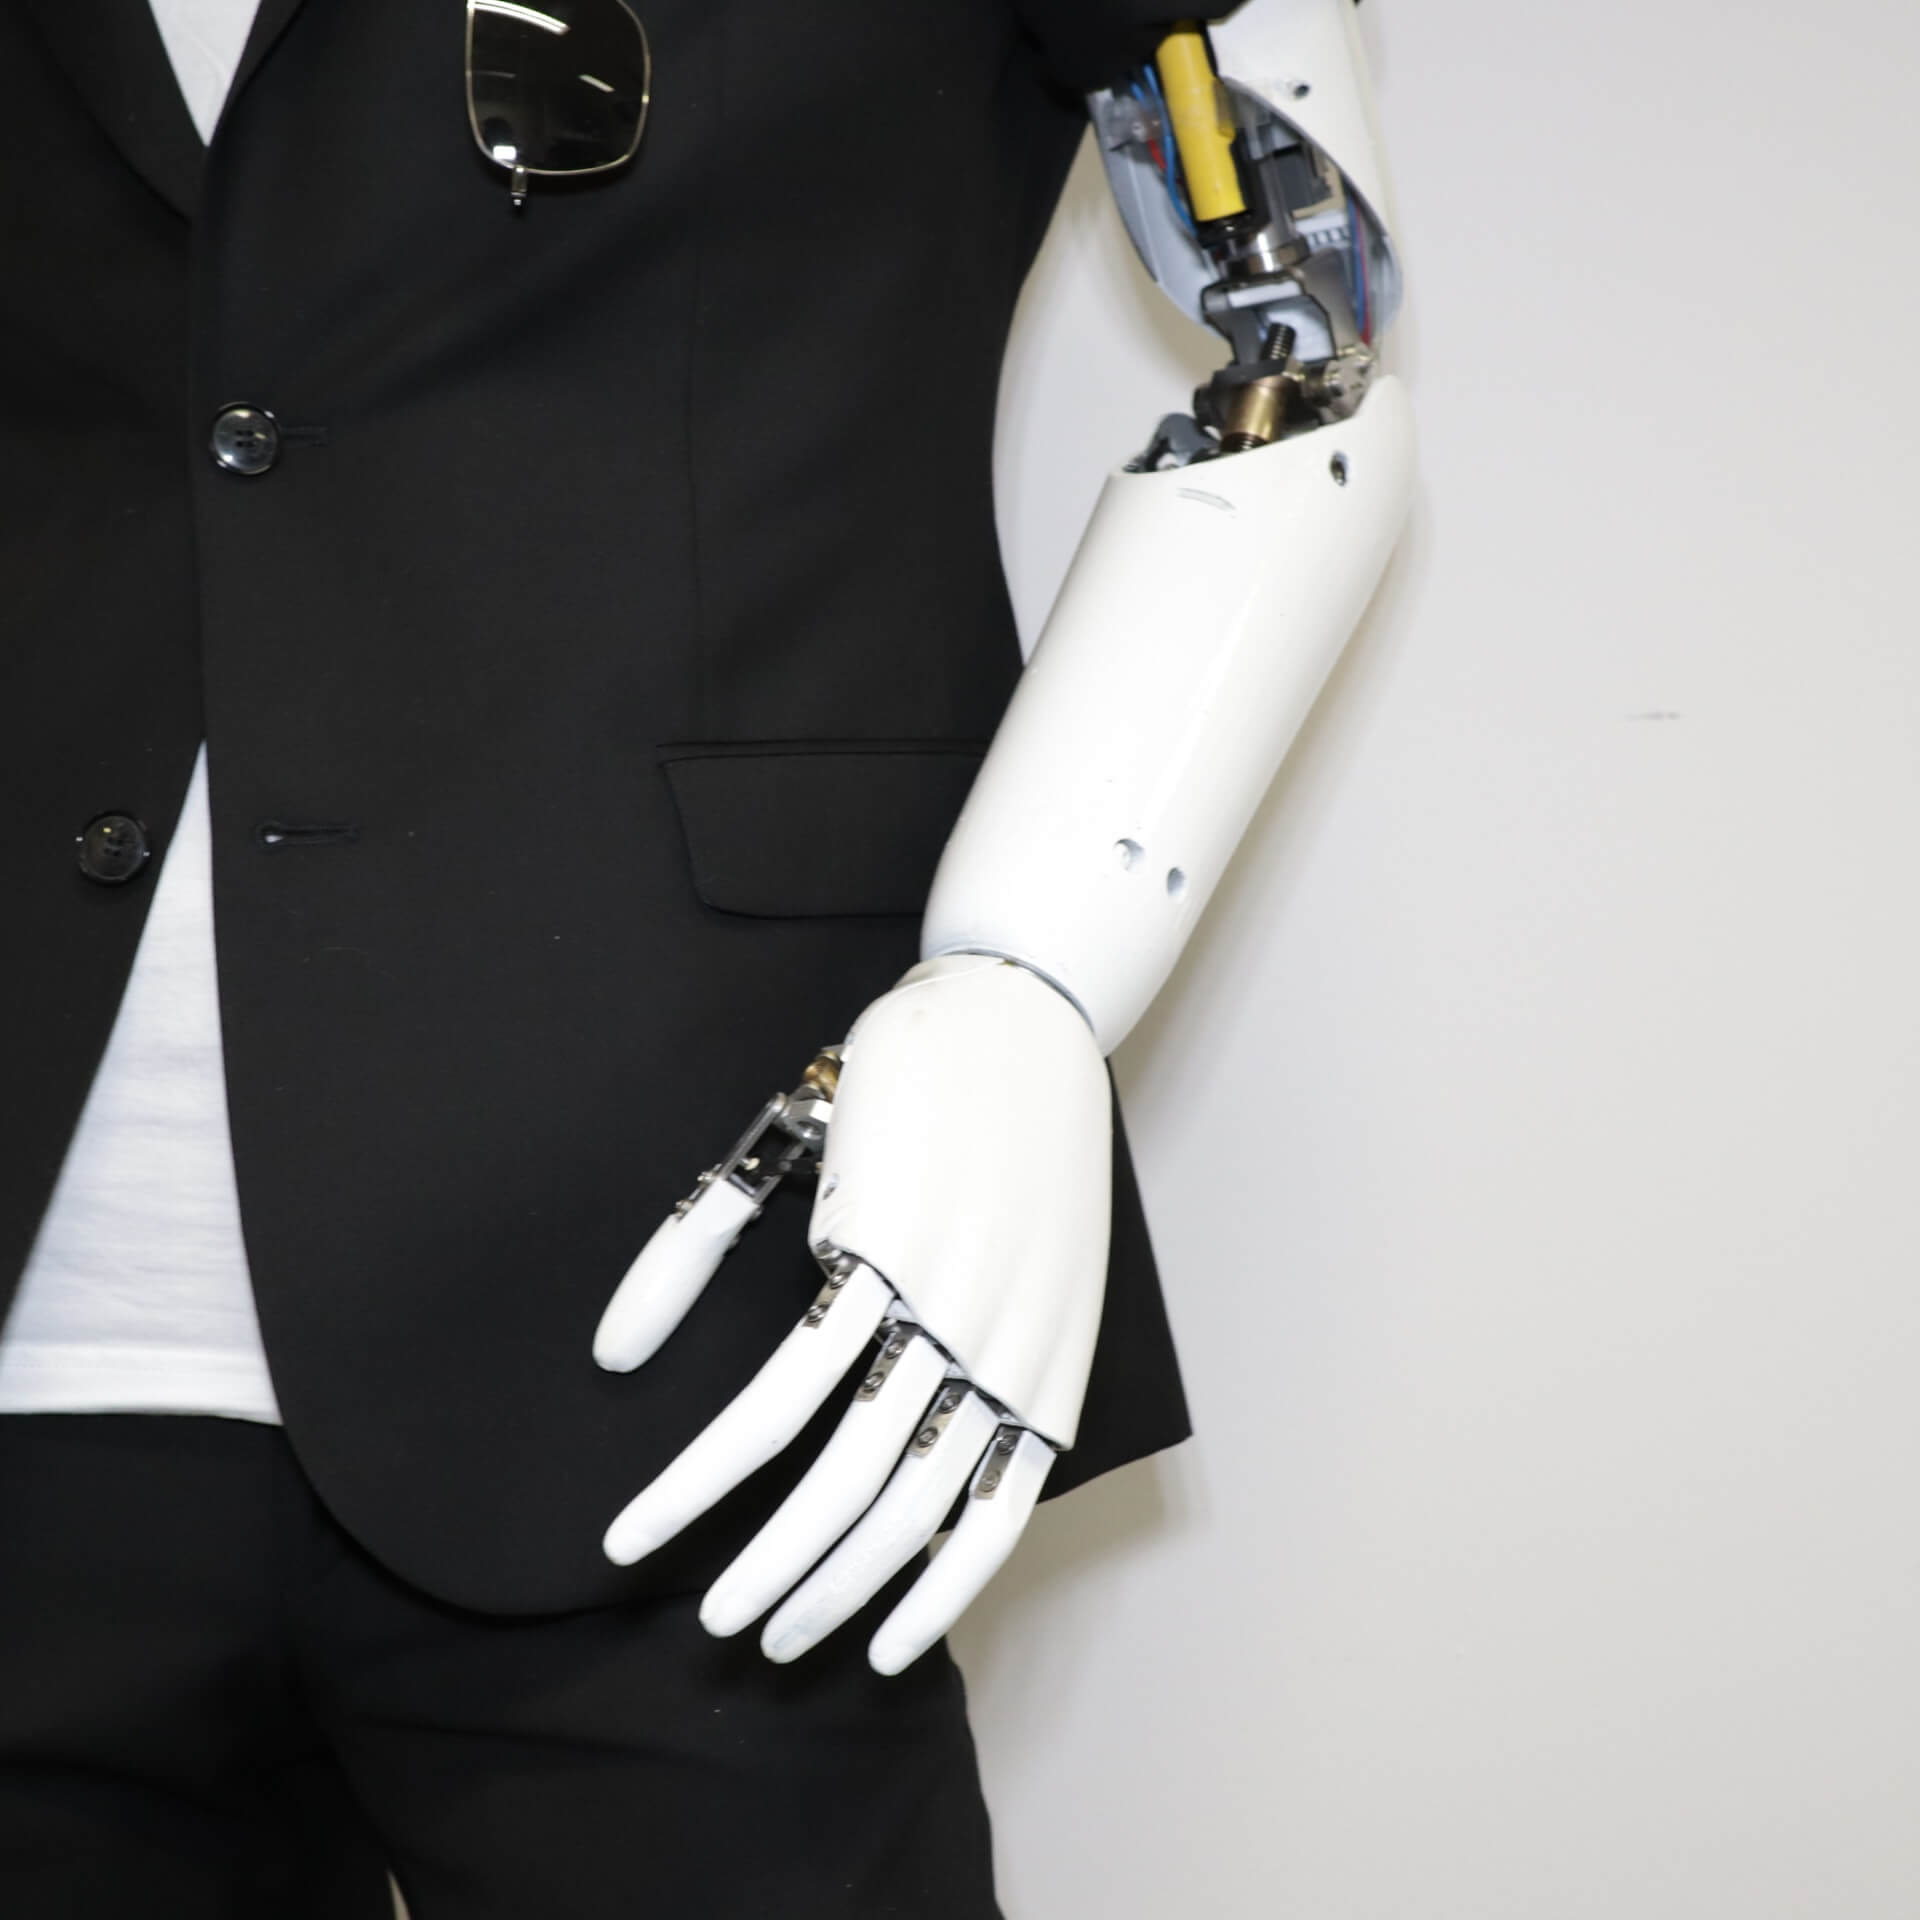 Bionic hand prosthesis on a mannequin